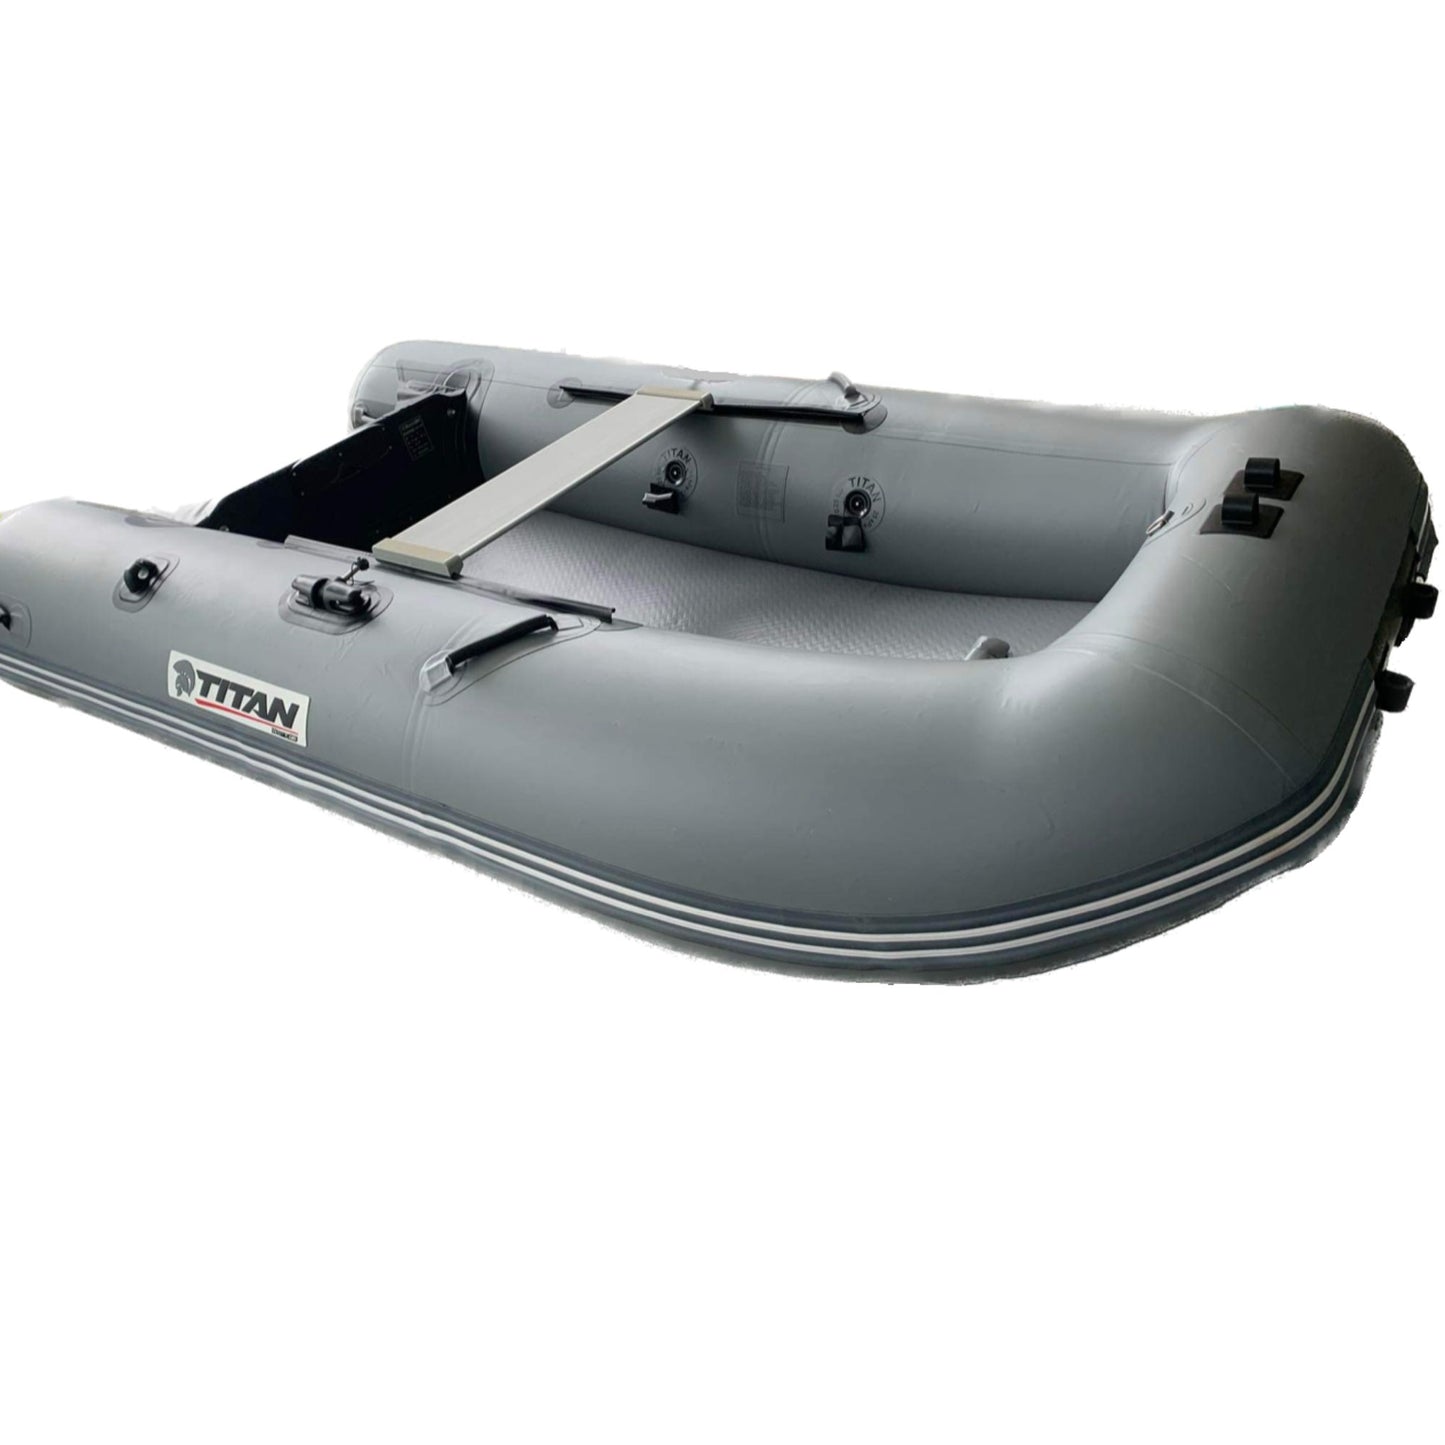 Titan 310 Inflatable Boat